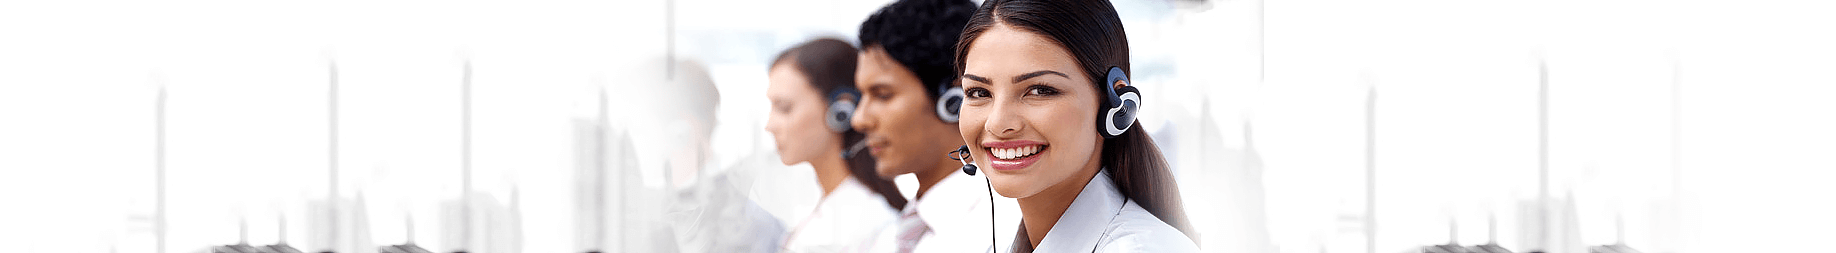 Pakistan Call Centers | Telemarketing Agencies | Telemarket | Telemarketing Service | Telemarketers | External Call Centers | Telemarketing | Telemarketing Sales Call Center | Telemarketing Services | Consultation | Call Center Services | External Call Center | Worldwide Call Centers - Your Telemarketing Experts | Outbound Telemarketing Outsourcing | Call Center Outsourcing Guidelines | Call Center Sales | Pakistani Call Centers | Call Centers in Pakistan | Call Centers in Southern Asia